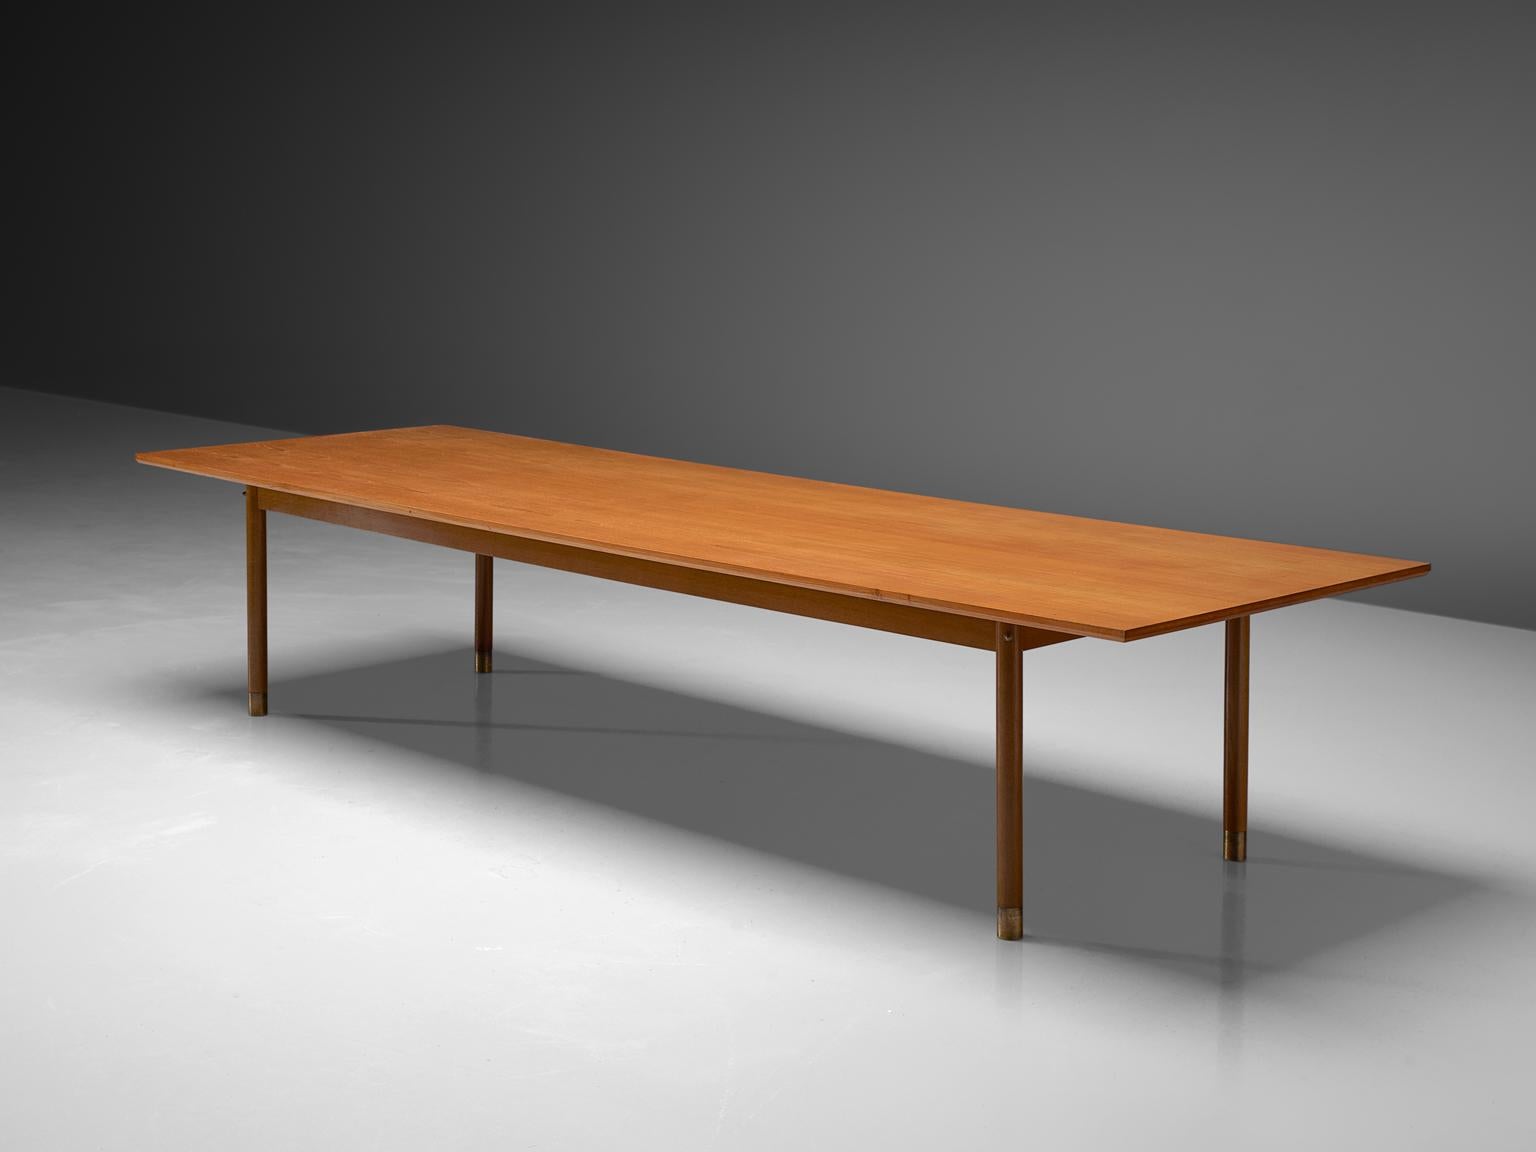 Danish dining or conference table, teak, brass, Denmark, 1950s

A rectangular top is lifted up by four circular legs with brass feet. The large top reaches over the legs. The natural grain of the teak structures the top visually.

